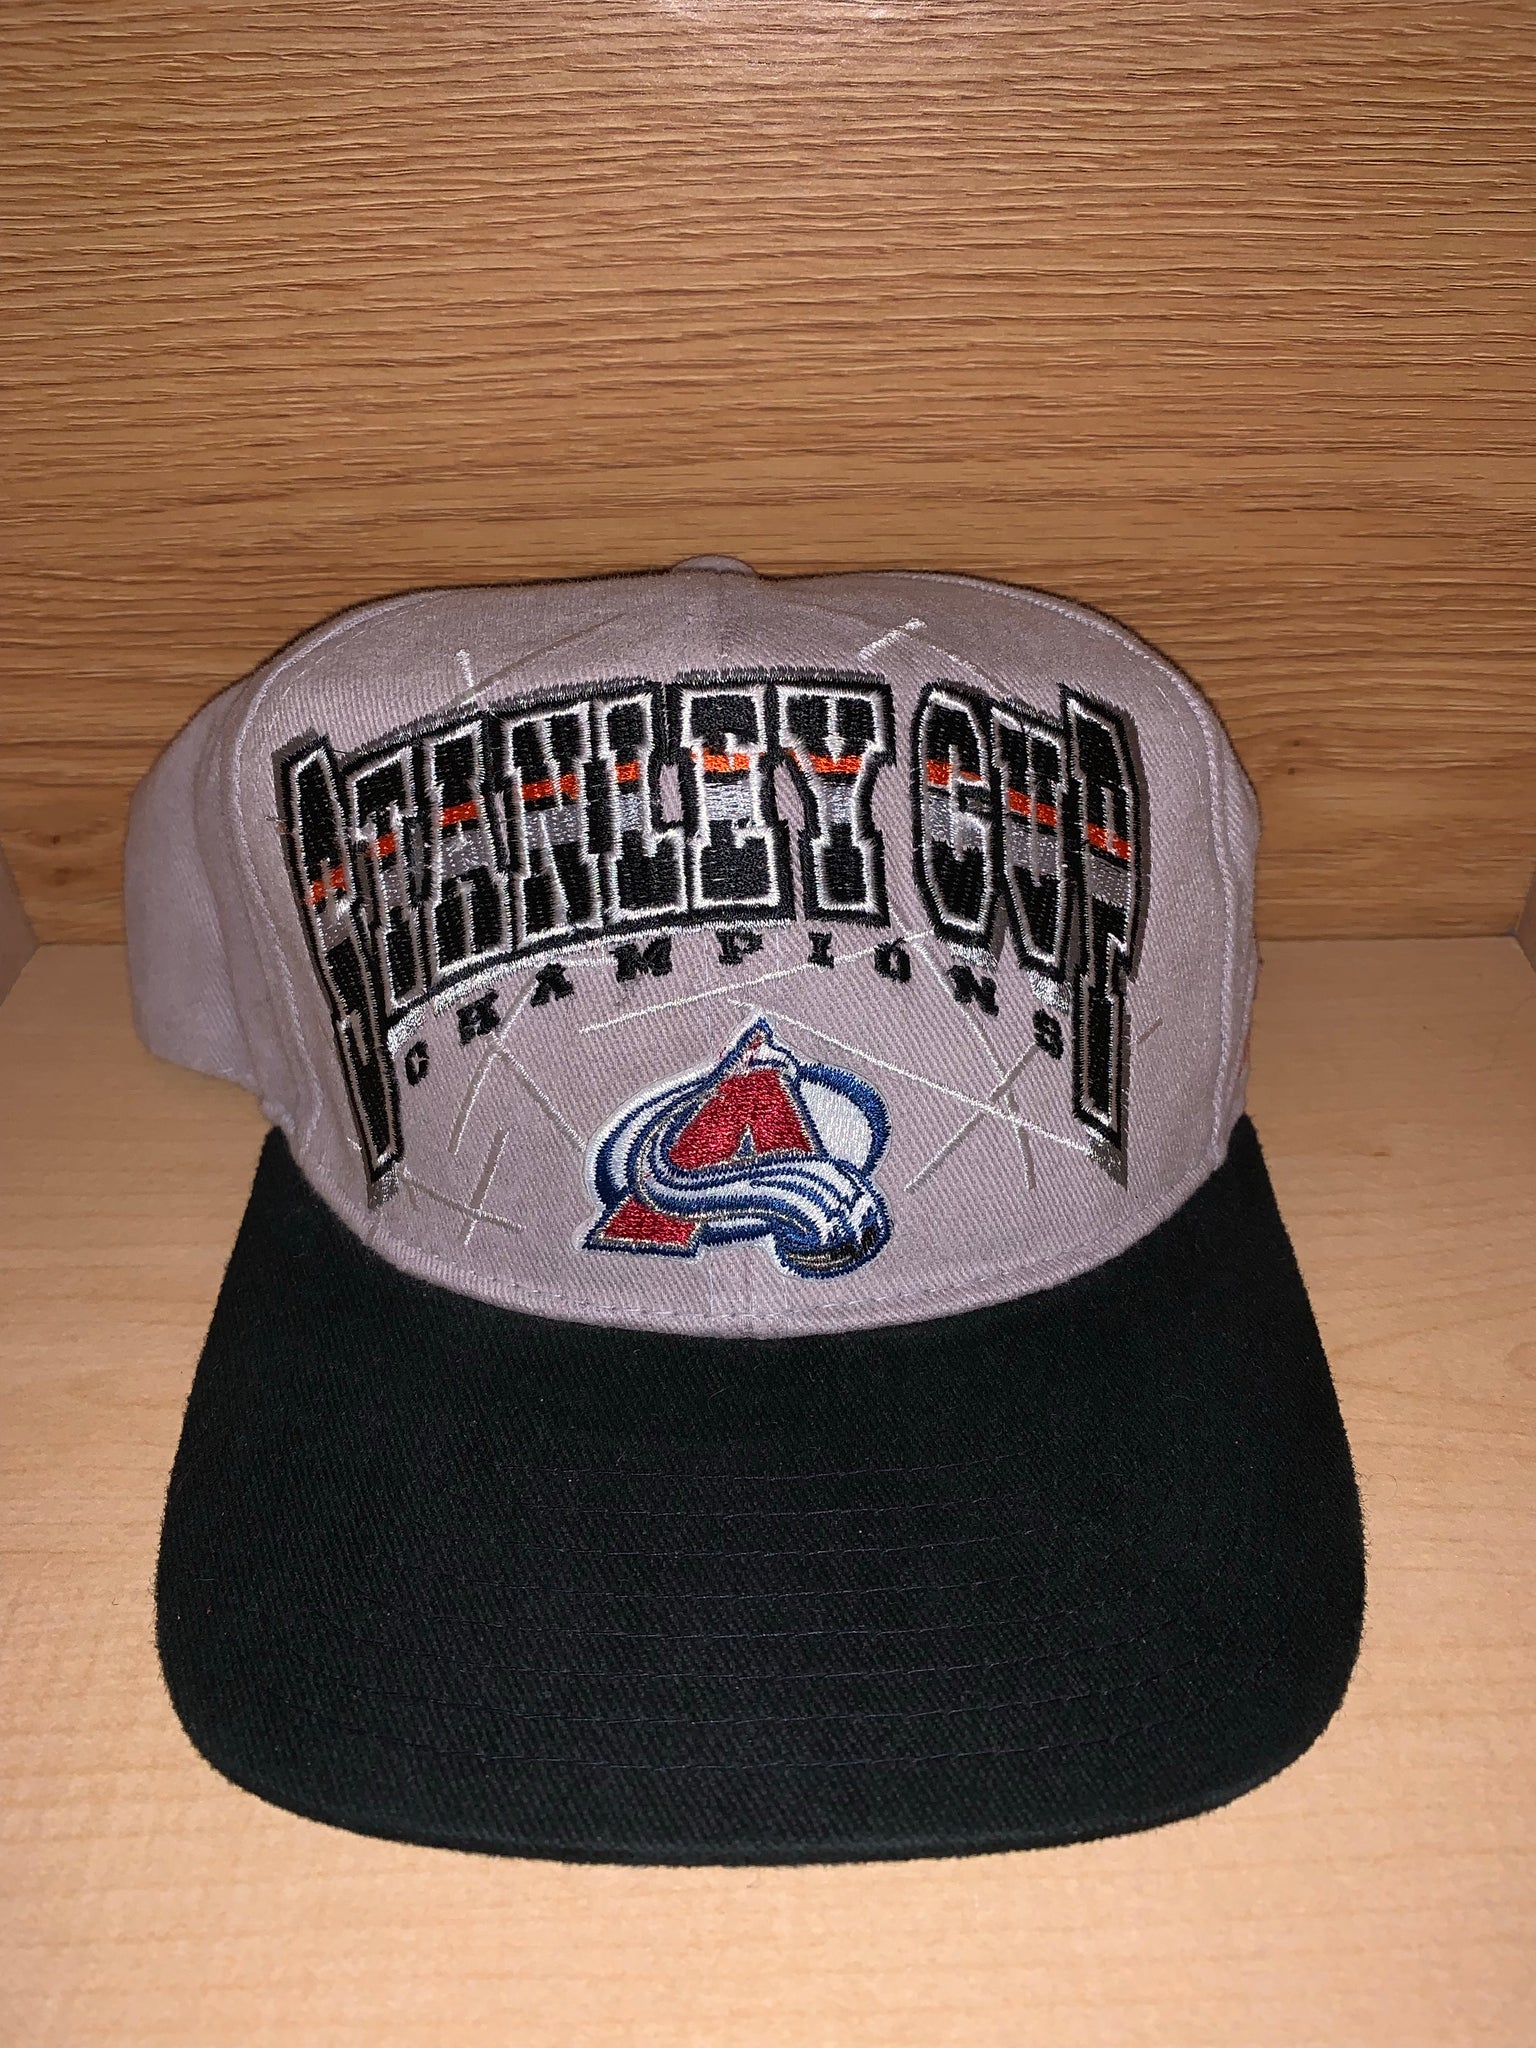 Found this '96 cup hat with tags still attached at a vintage